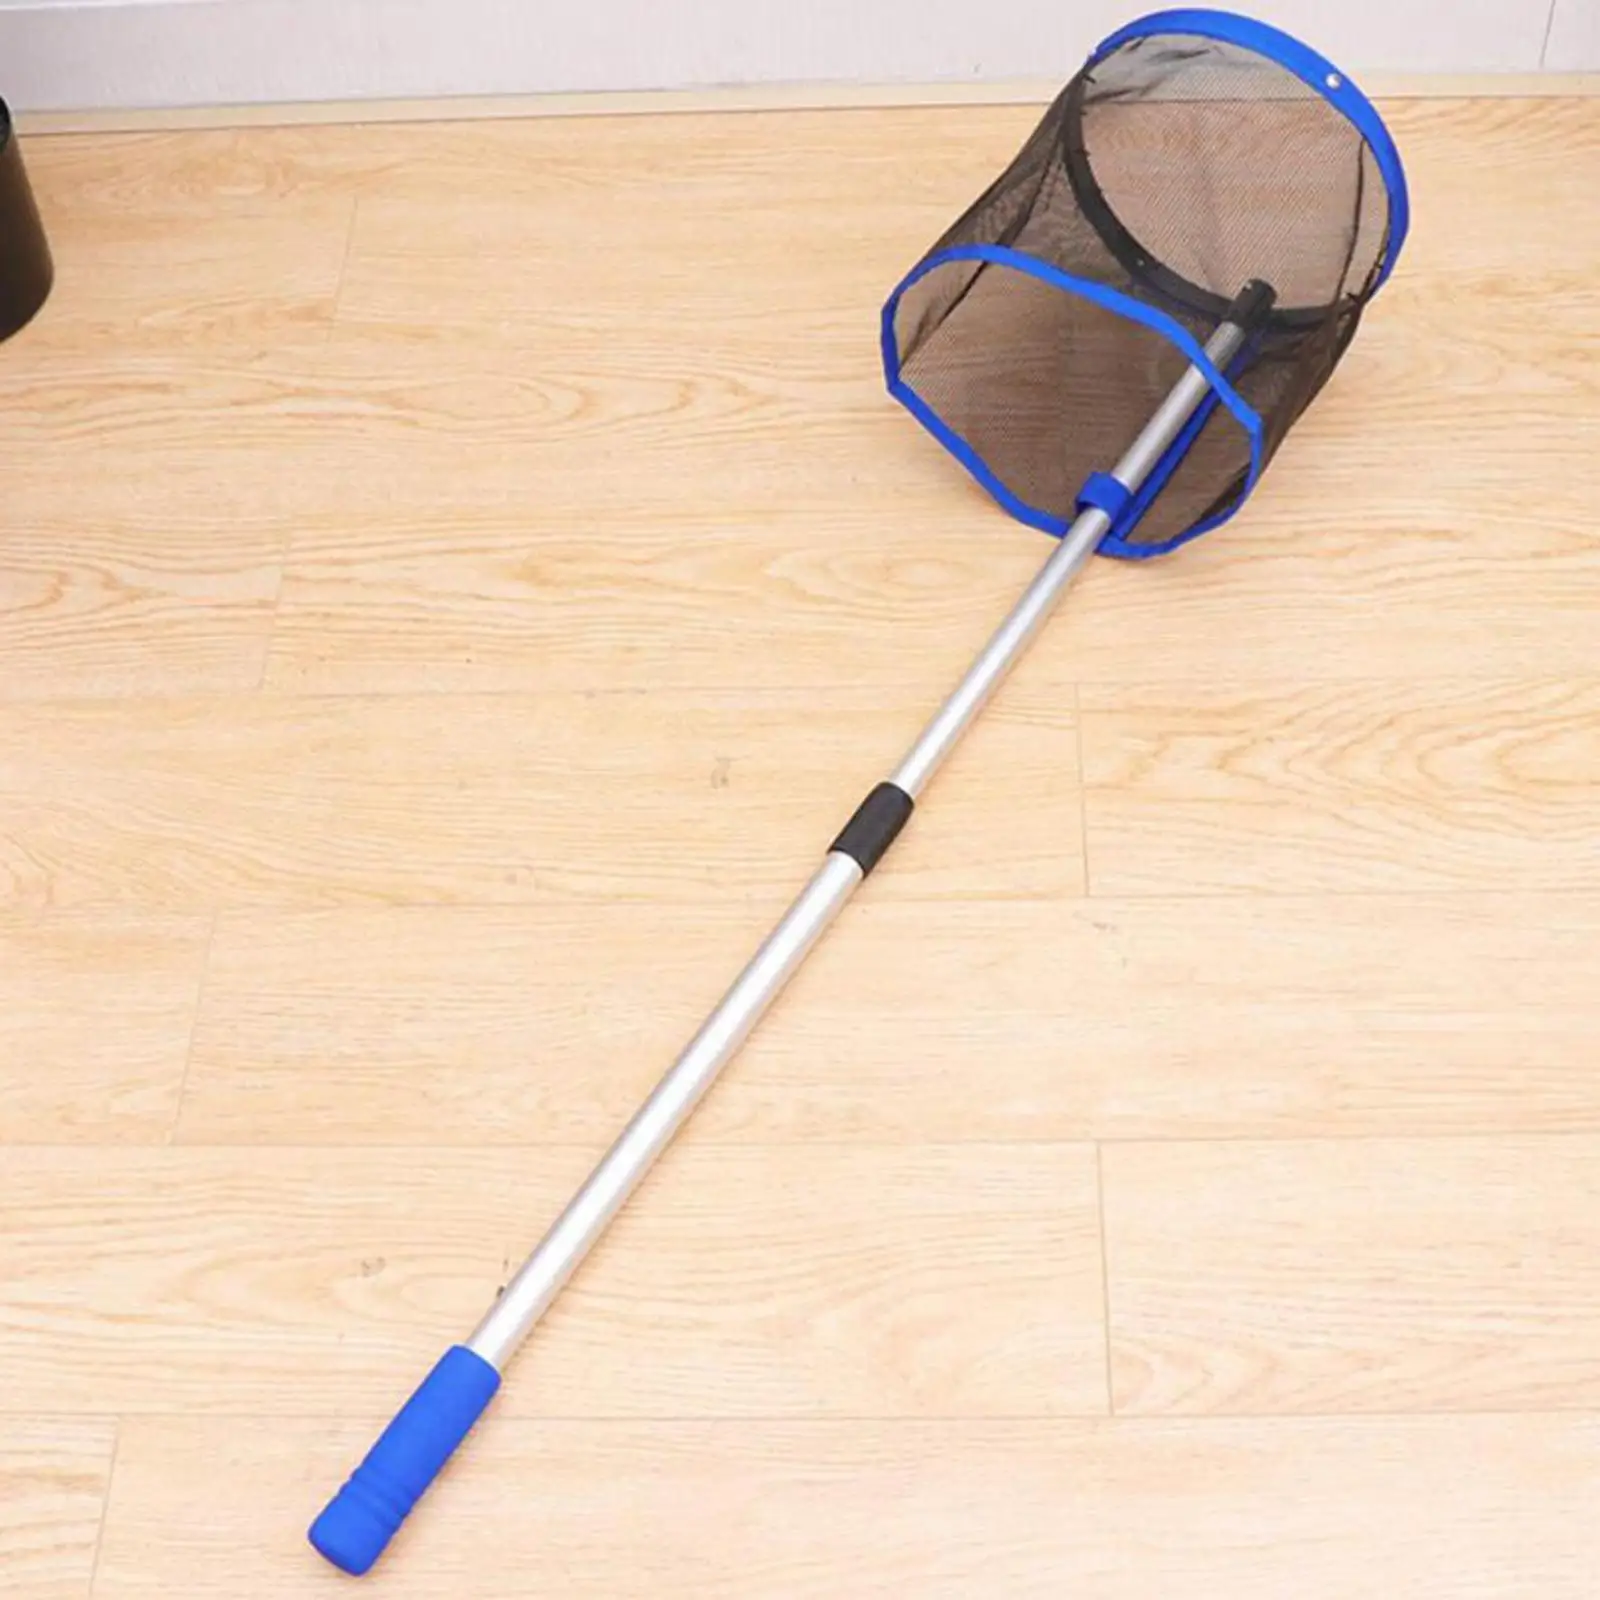 Ball Collector, Ball Picker Upper for Tennis, ,  and , Holds